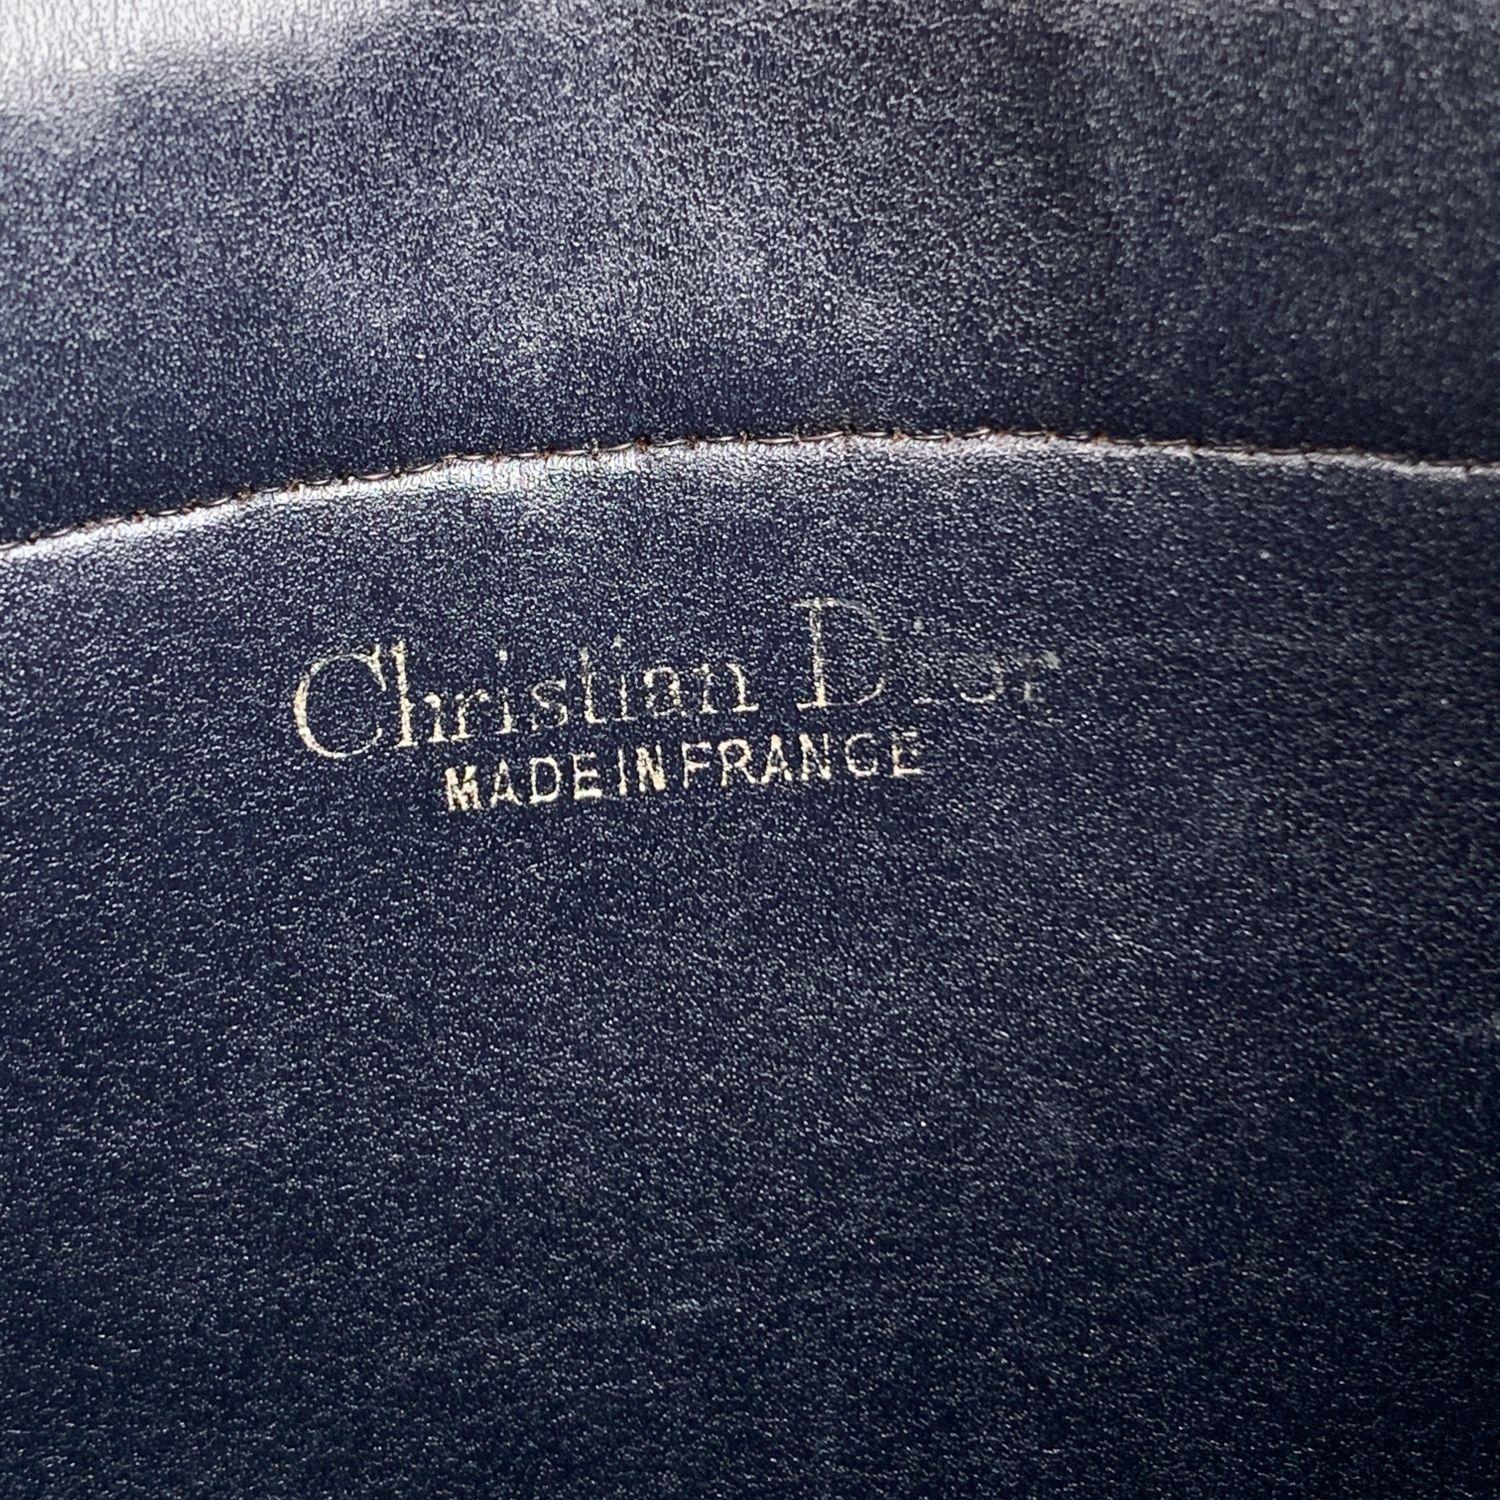 Vintage CHRISTIAN DIOR blue 'Diorissimo' tapestry monogram canvas clutch bag. Blue leather lining. 'Christian Dior - made in France' embossed inside.



Details

MATERIAL: Canvas

COLOR: Blue

MODEL: Clutch Purse

GENDER: Women

SIZE: